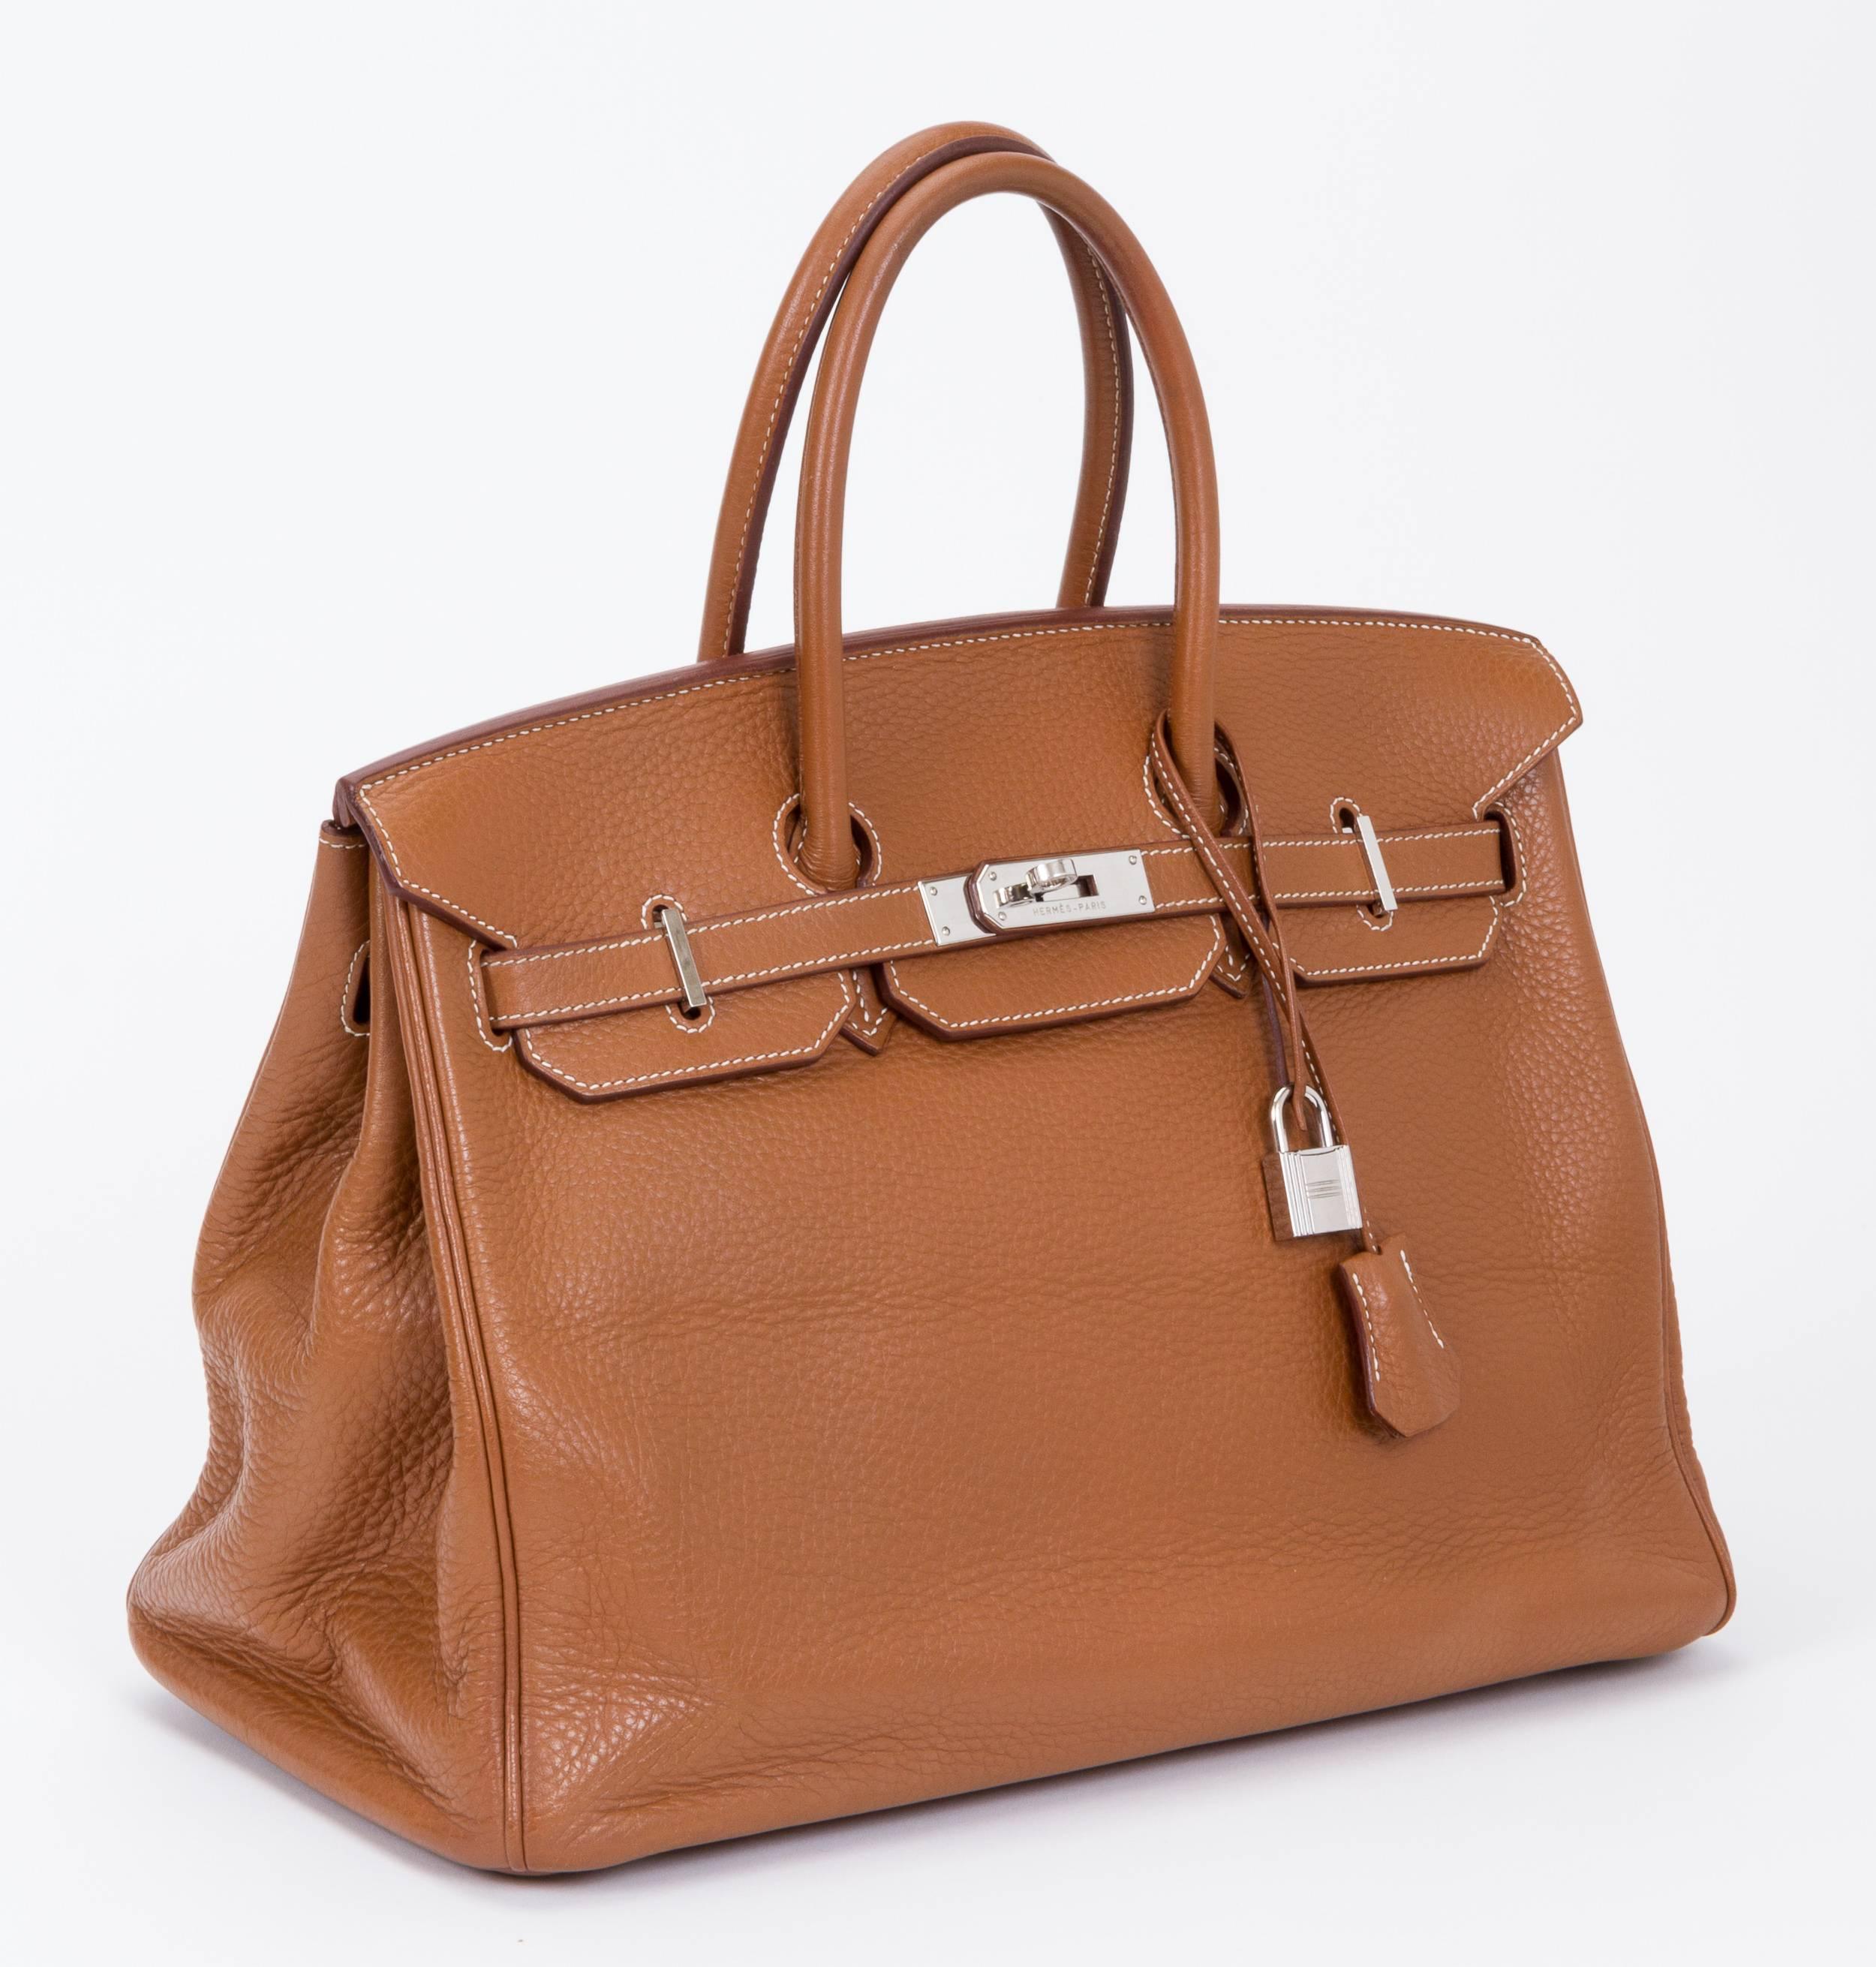 Hermès Birkin 35cm in gold clemence leather and palladium hardware. Item has been recently at Hermes spa for treatment. Clemence leather is soft and has a slouchy look. Date stamp 